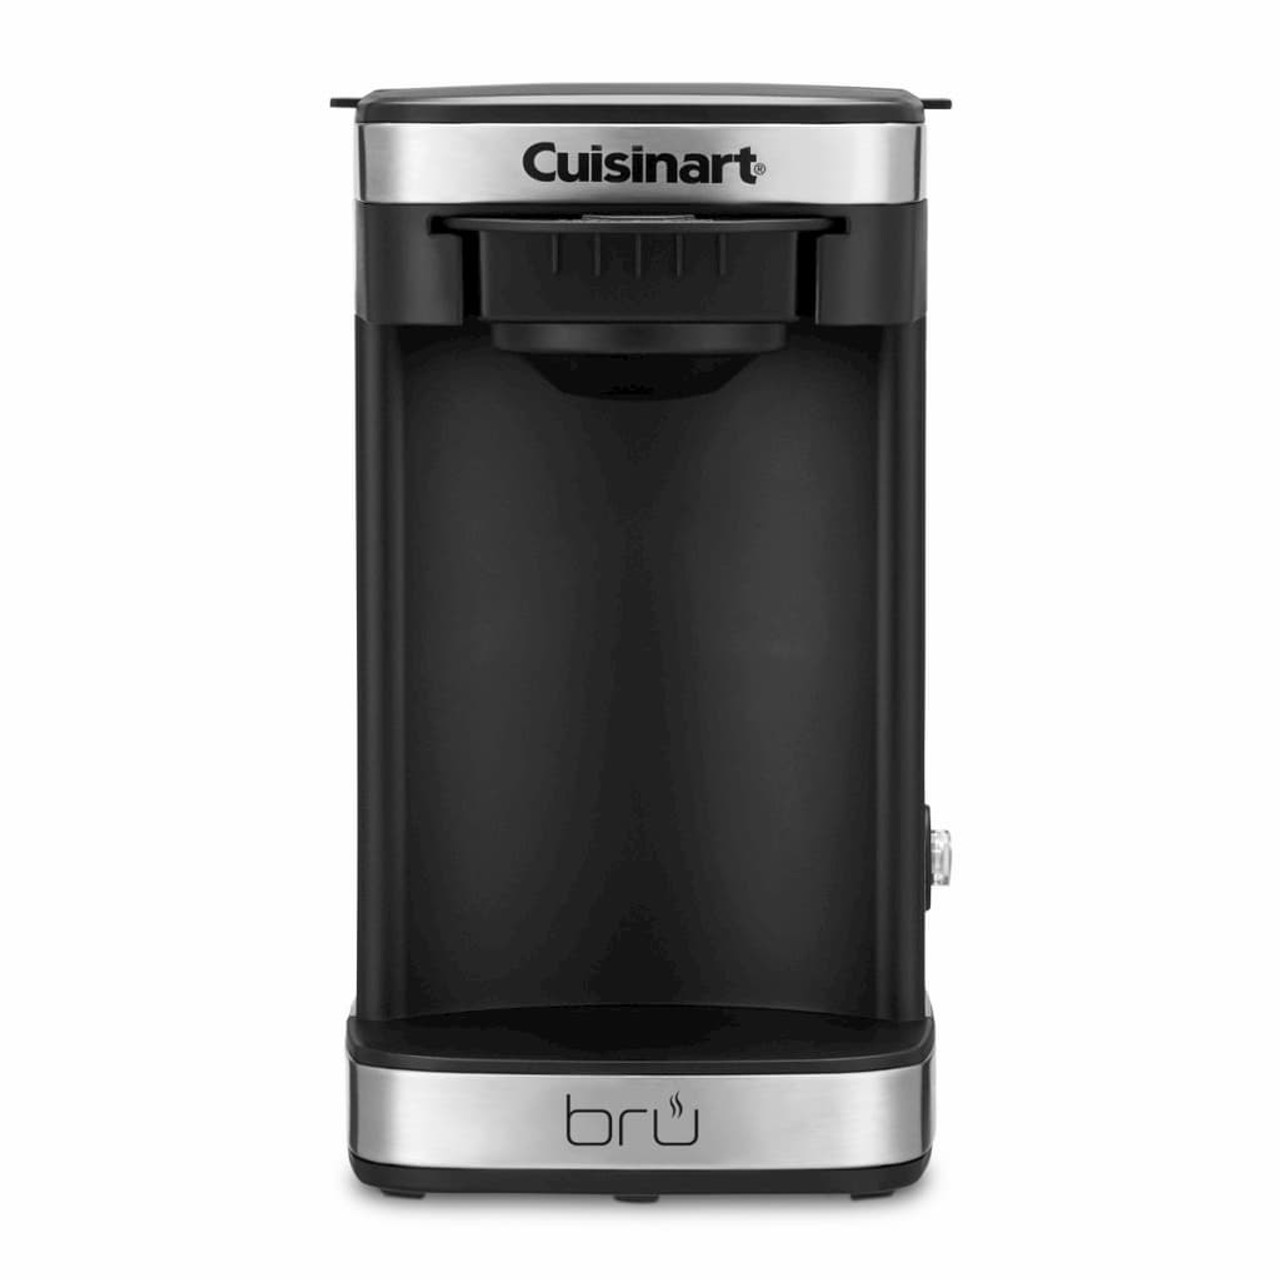 Conair Cuisinart WCM11S, 2 Cup Coffee Maker - 120V